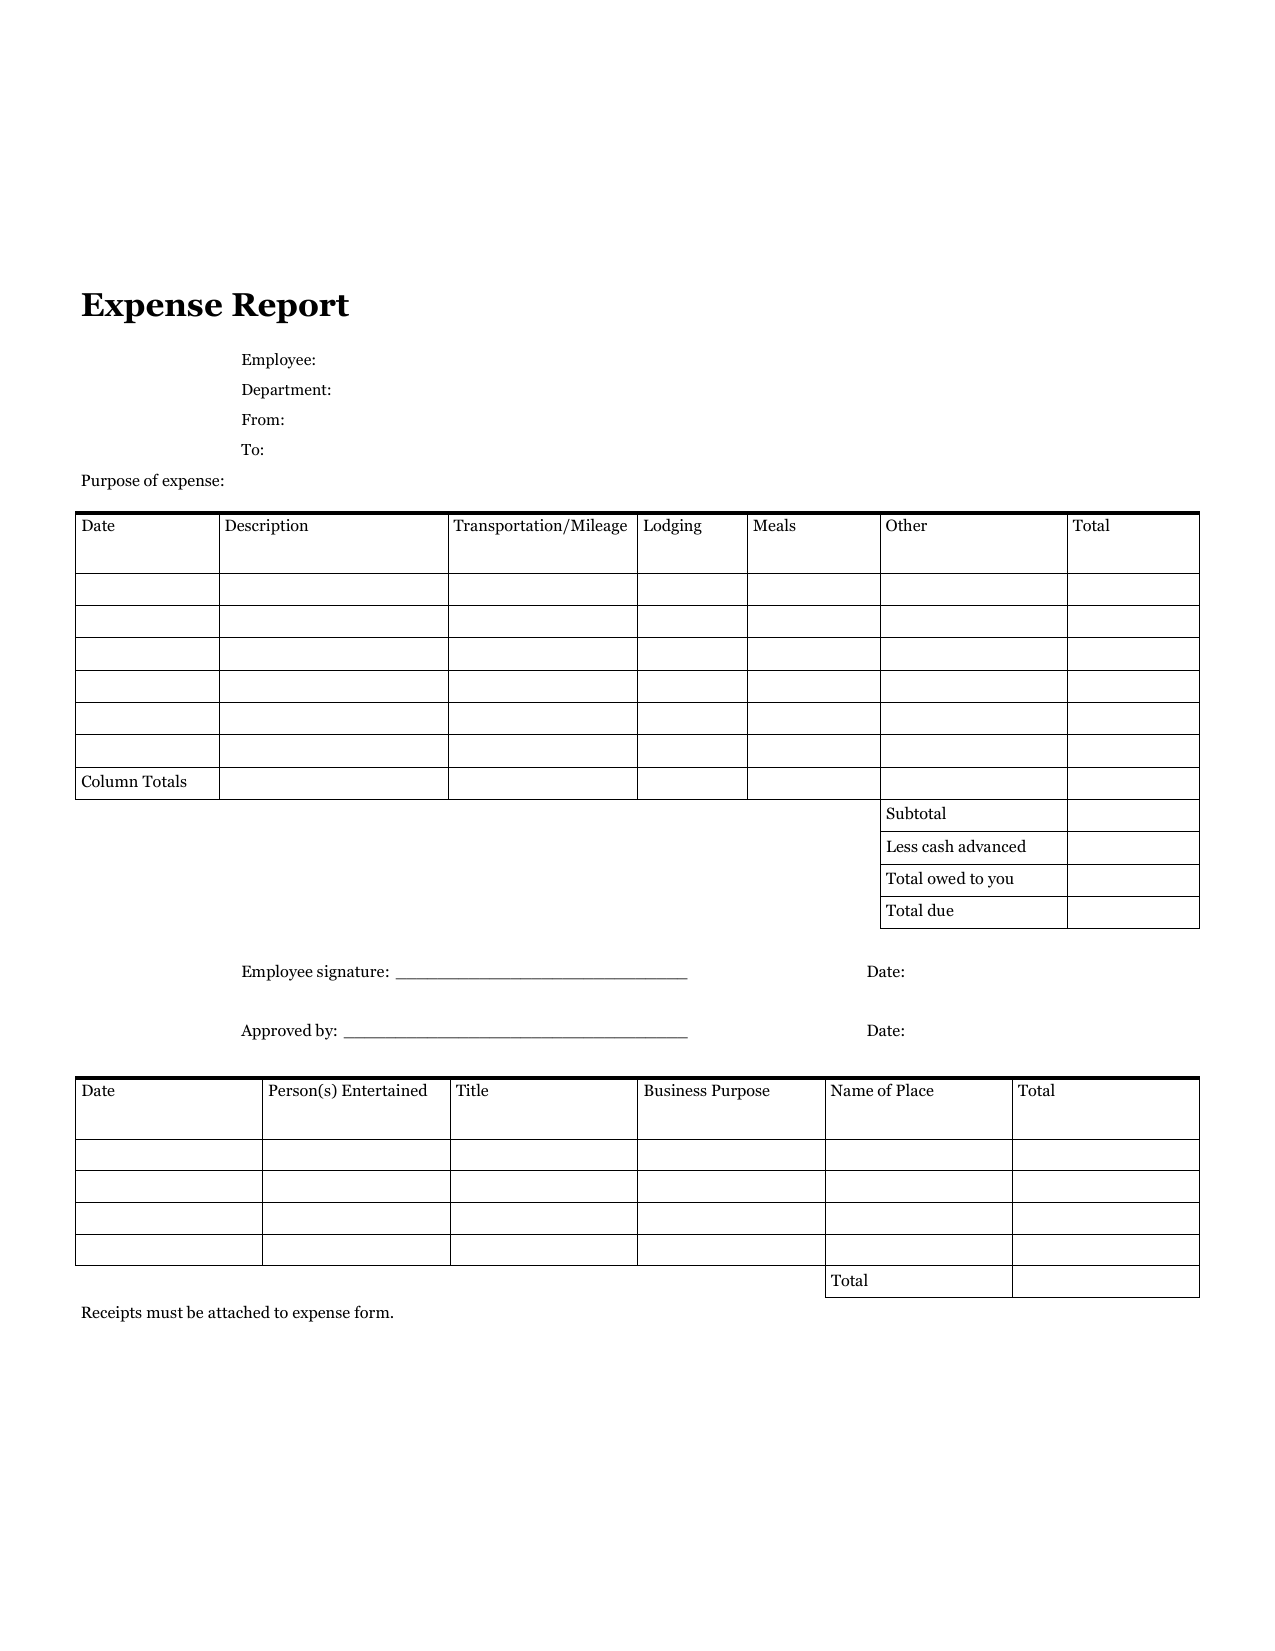 blank expense report template   Boat.jeremyeaton.co